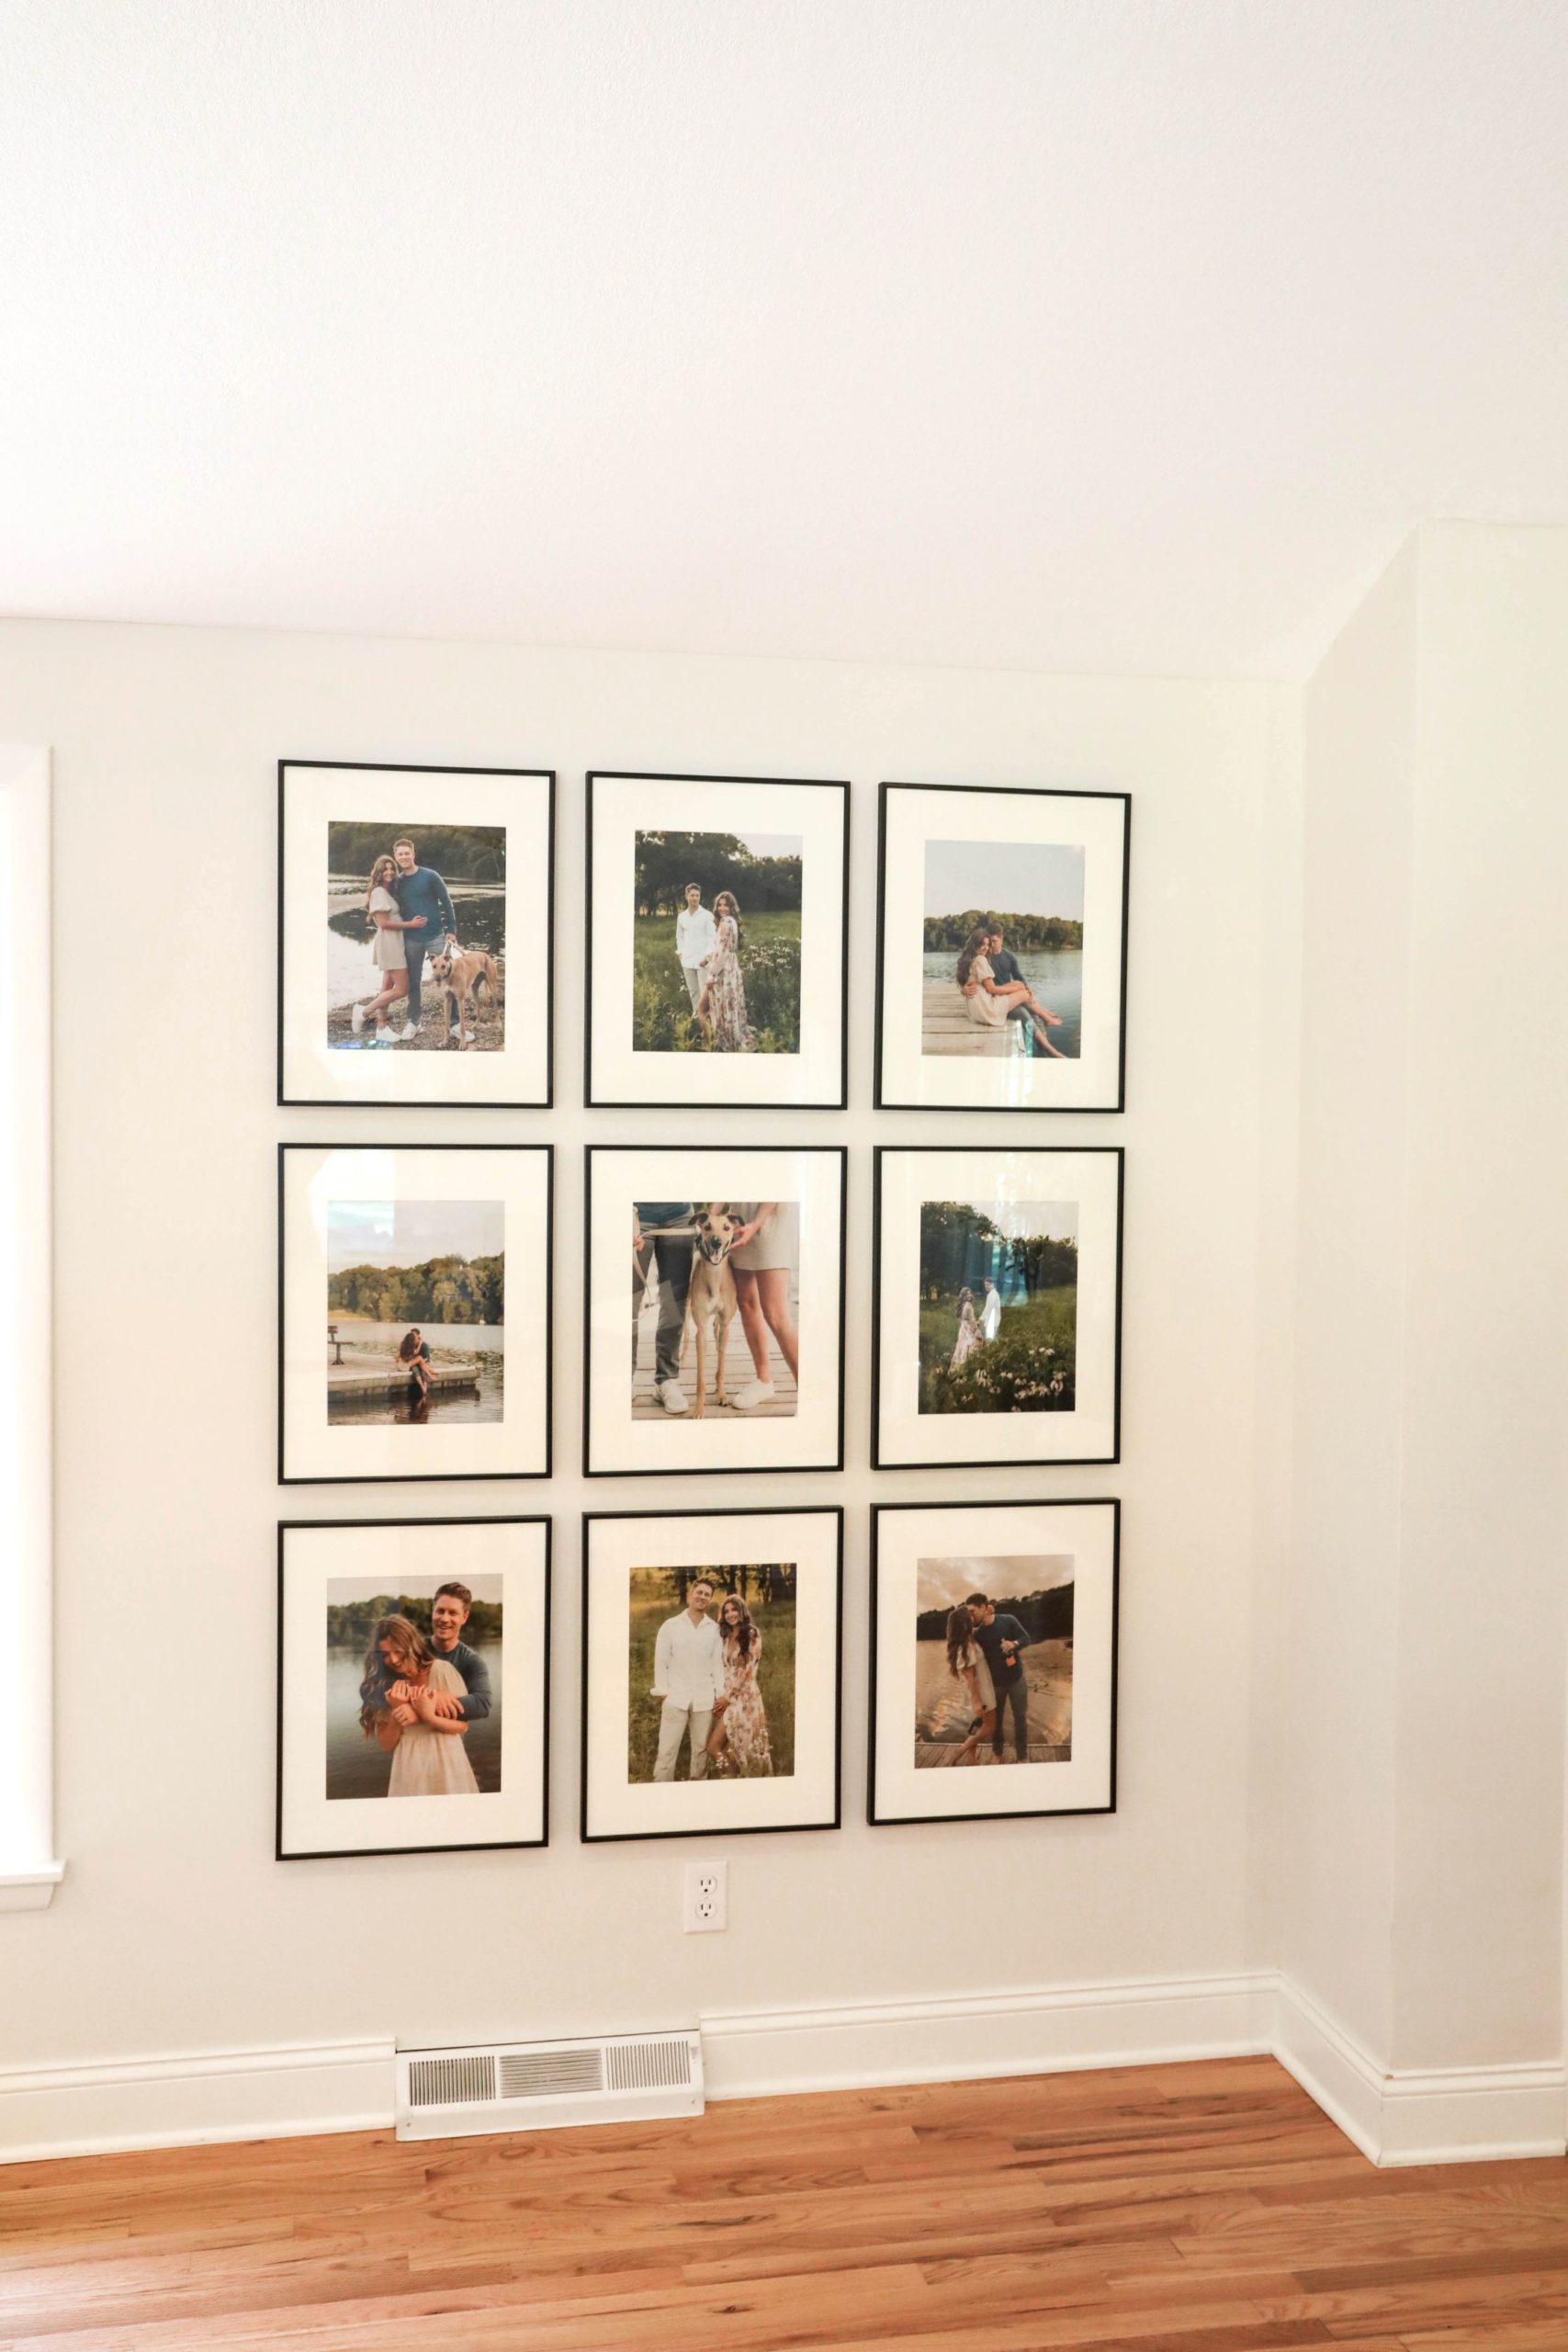 Gallery wall entryway daily dose of charm lauren emily lindmark